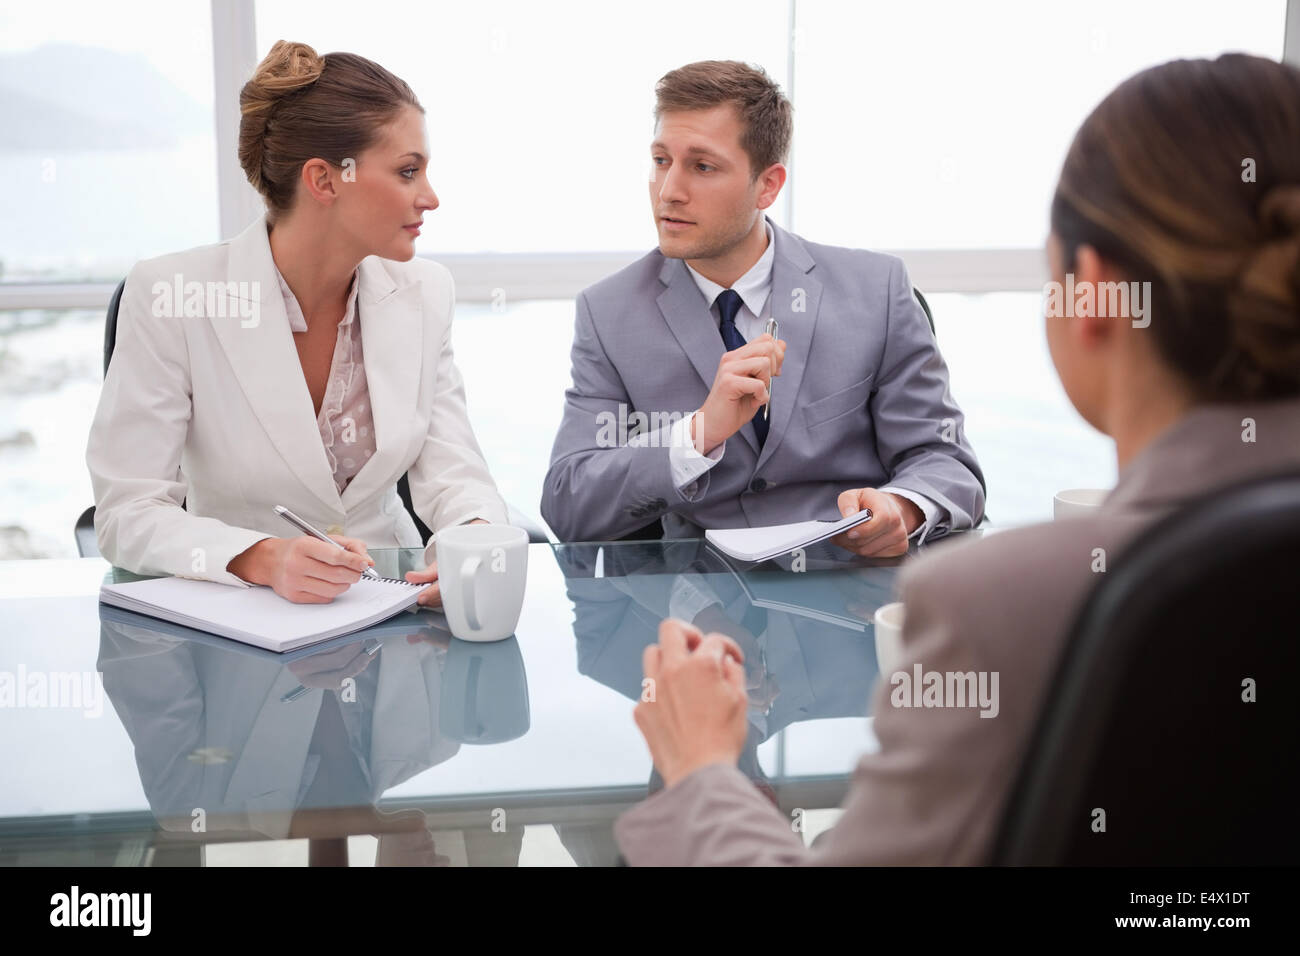 Business team deliberating with lawyer Stock Photo